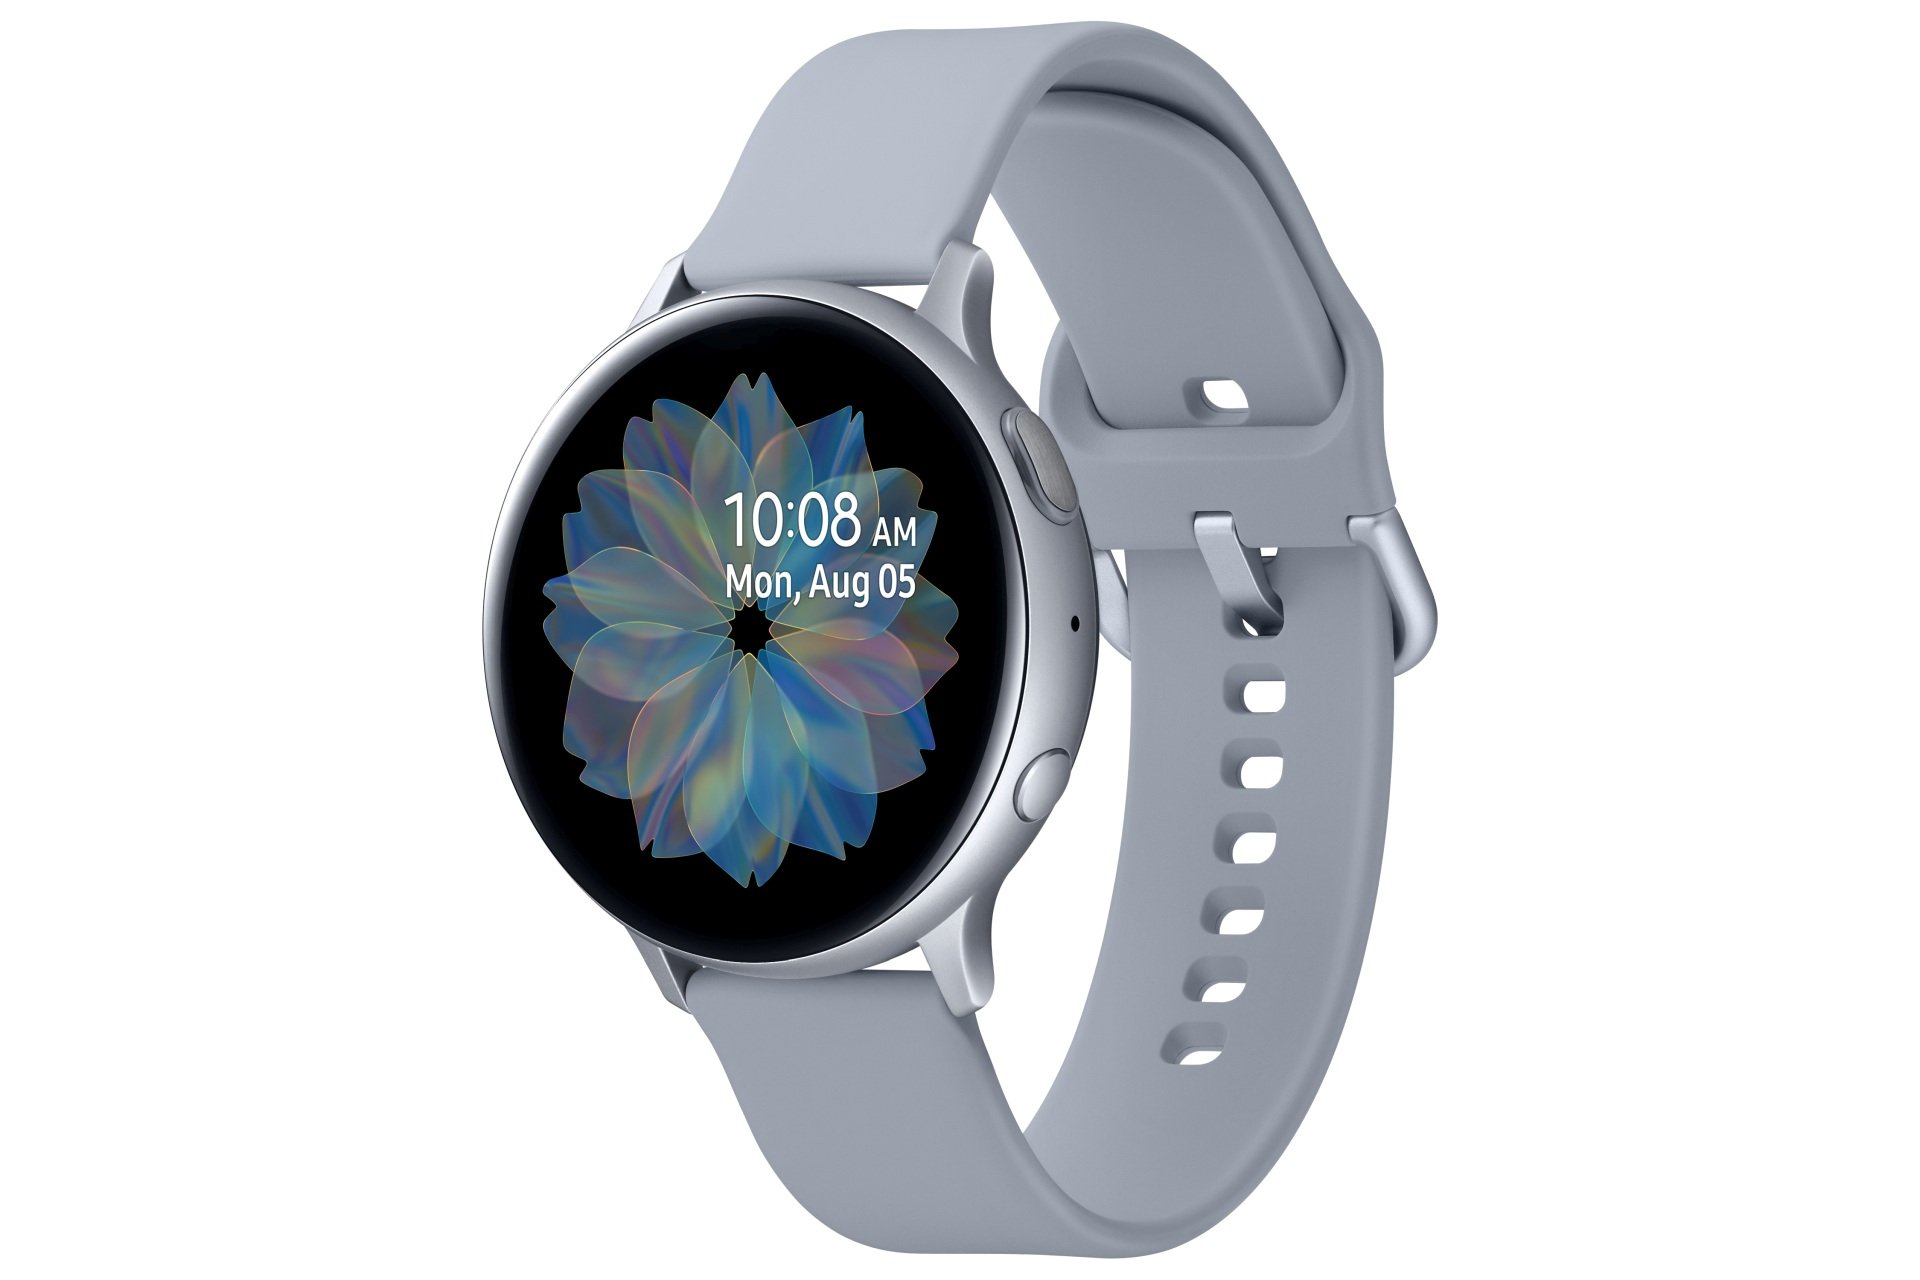 Samsung Galaxy Watch Active 2 price and 